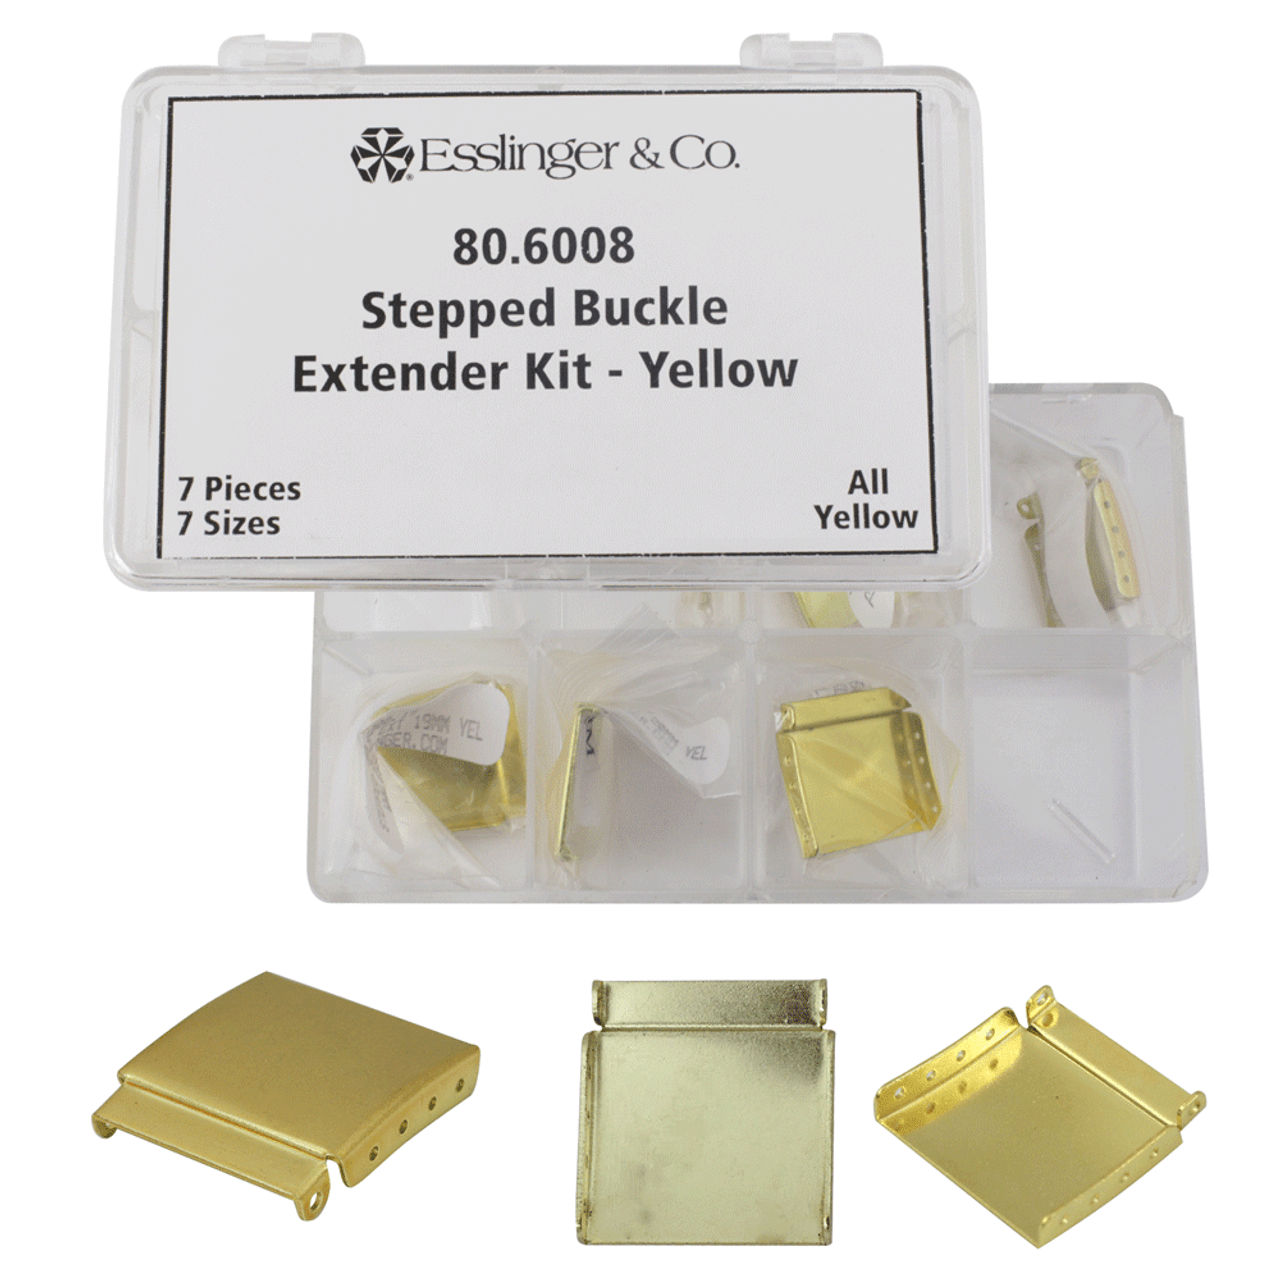 Stepped Buckle Extender Assortment in Yellow Gold Plated, 7 Pieces